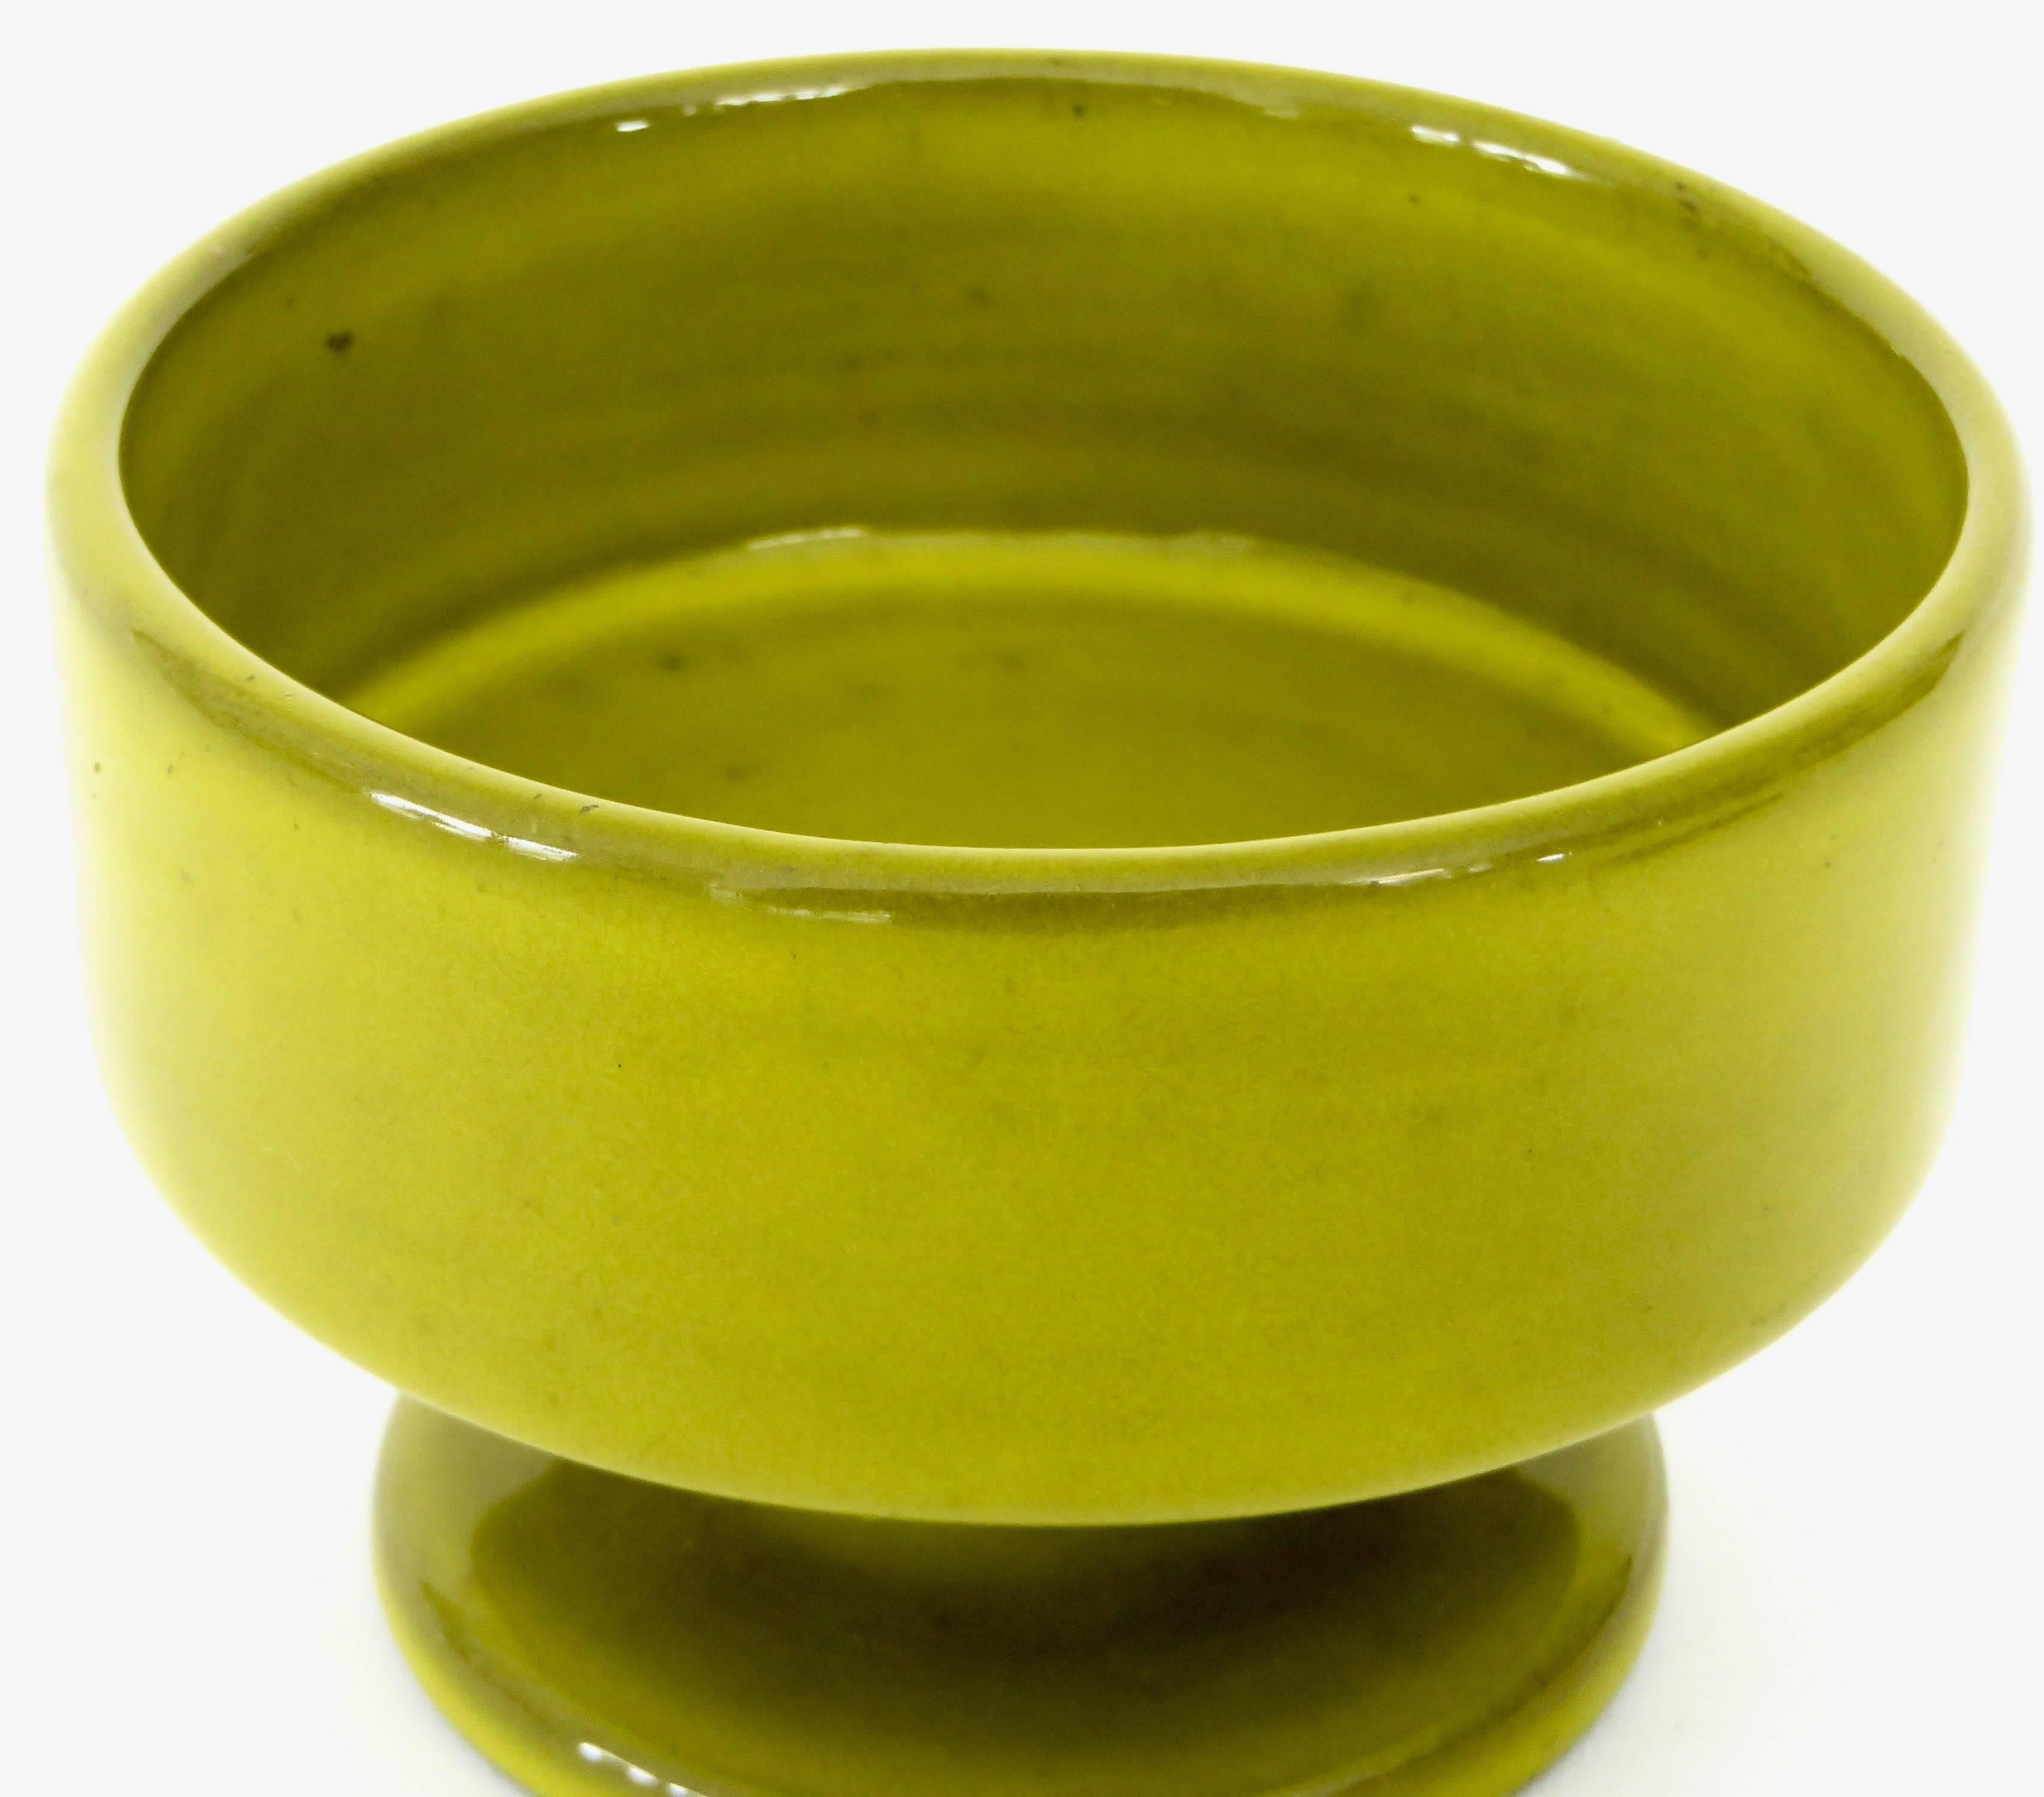 A small French artists Jacques and Dani Ruelland chartruese green low ceramic chalice.
Signed Ruelland.